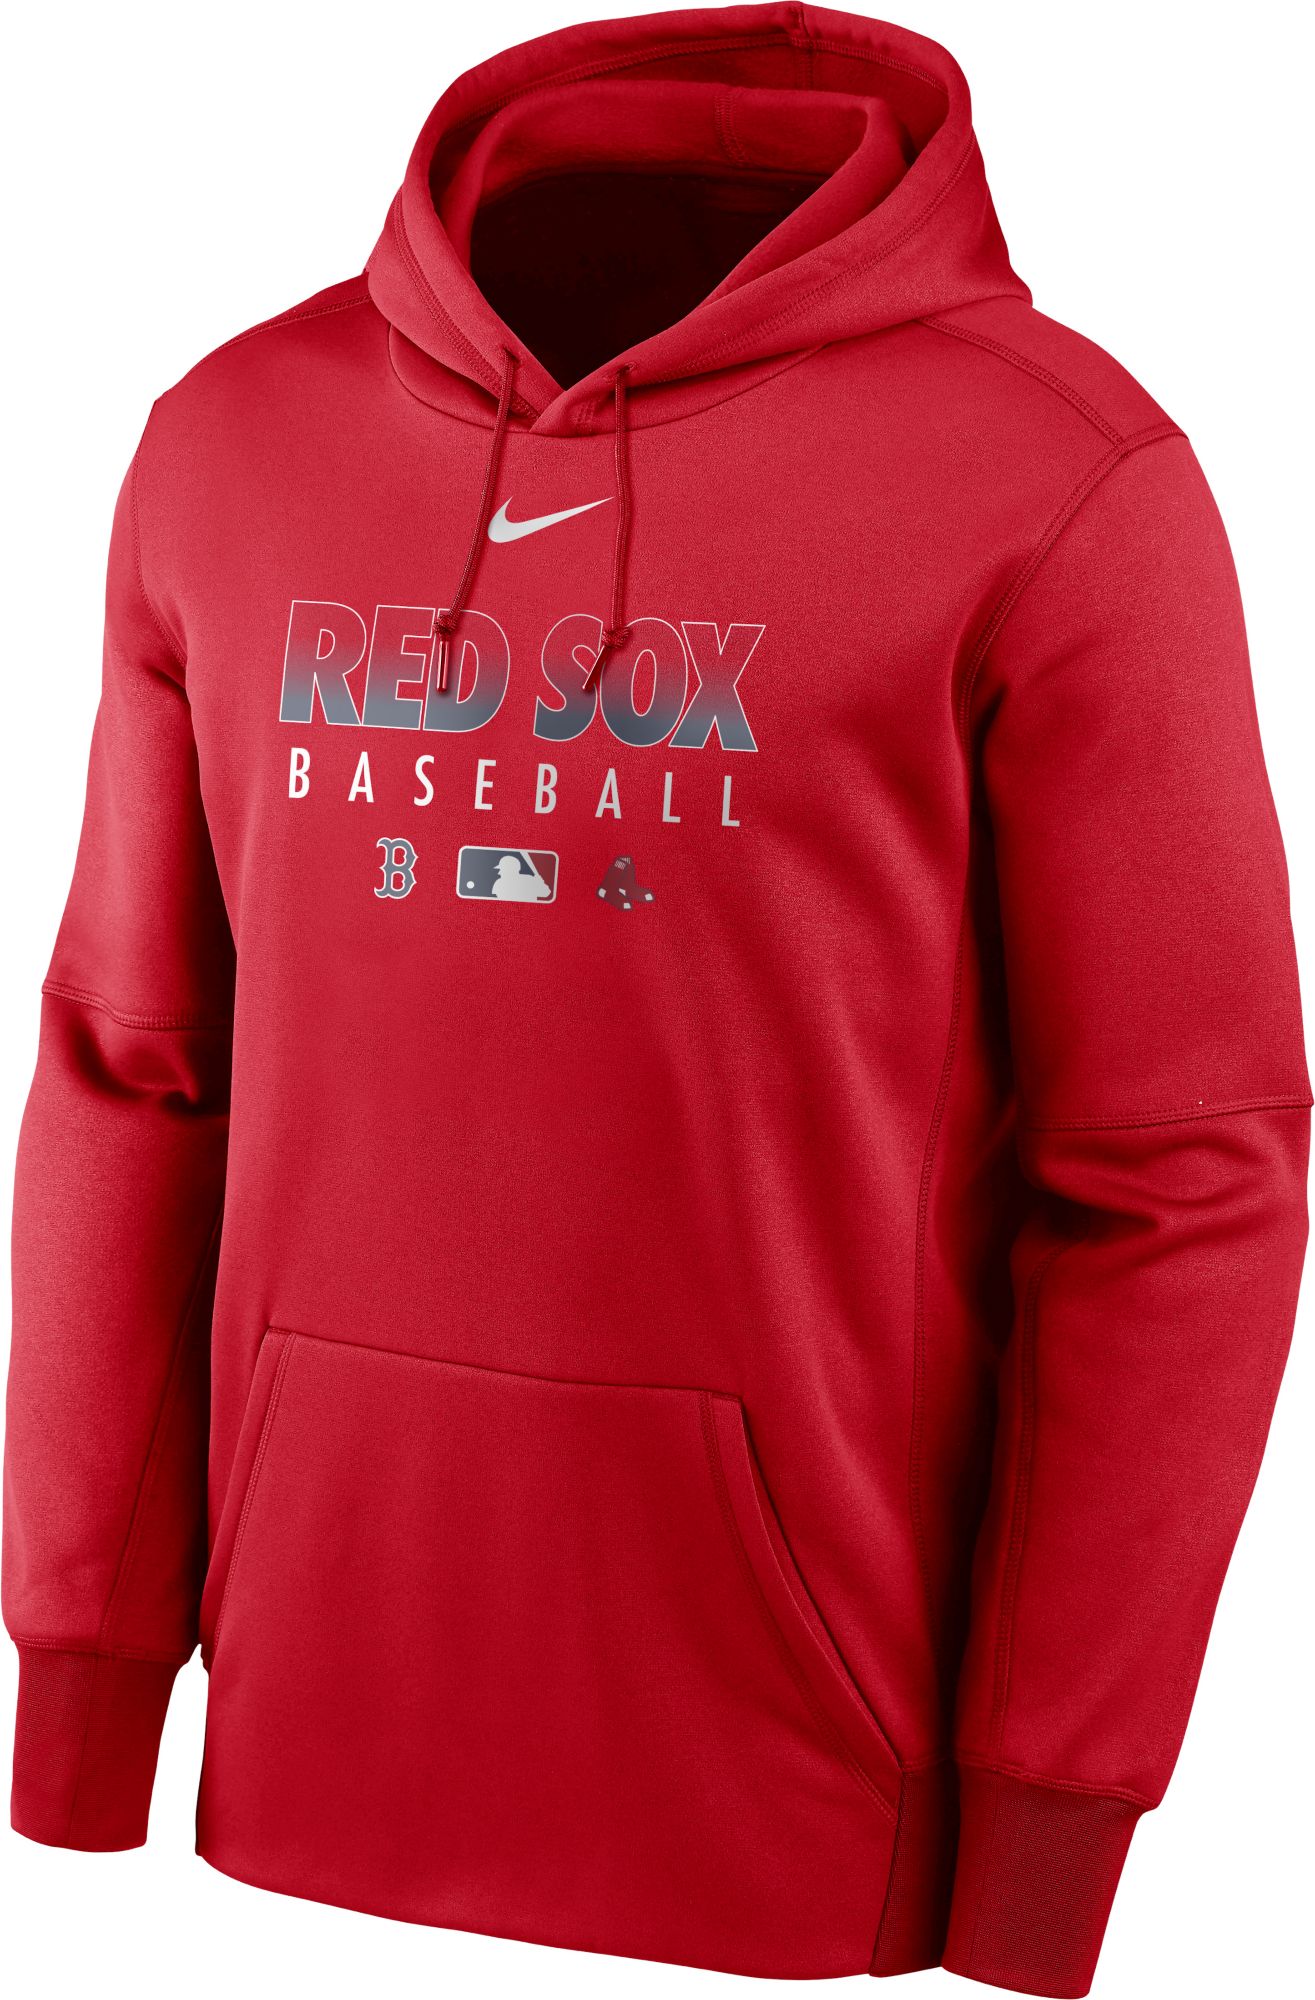 red sox playoff hoodie